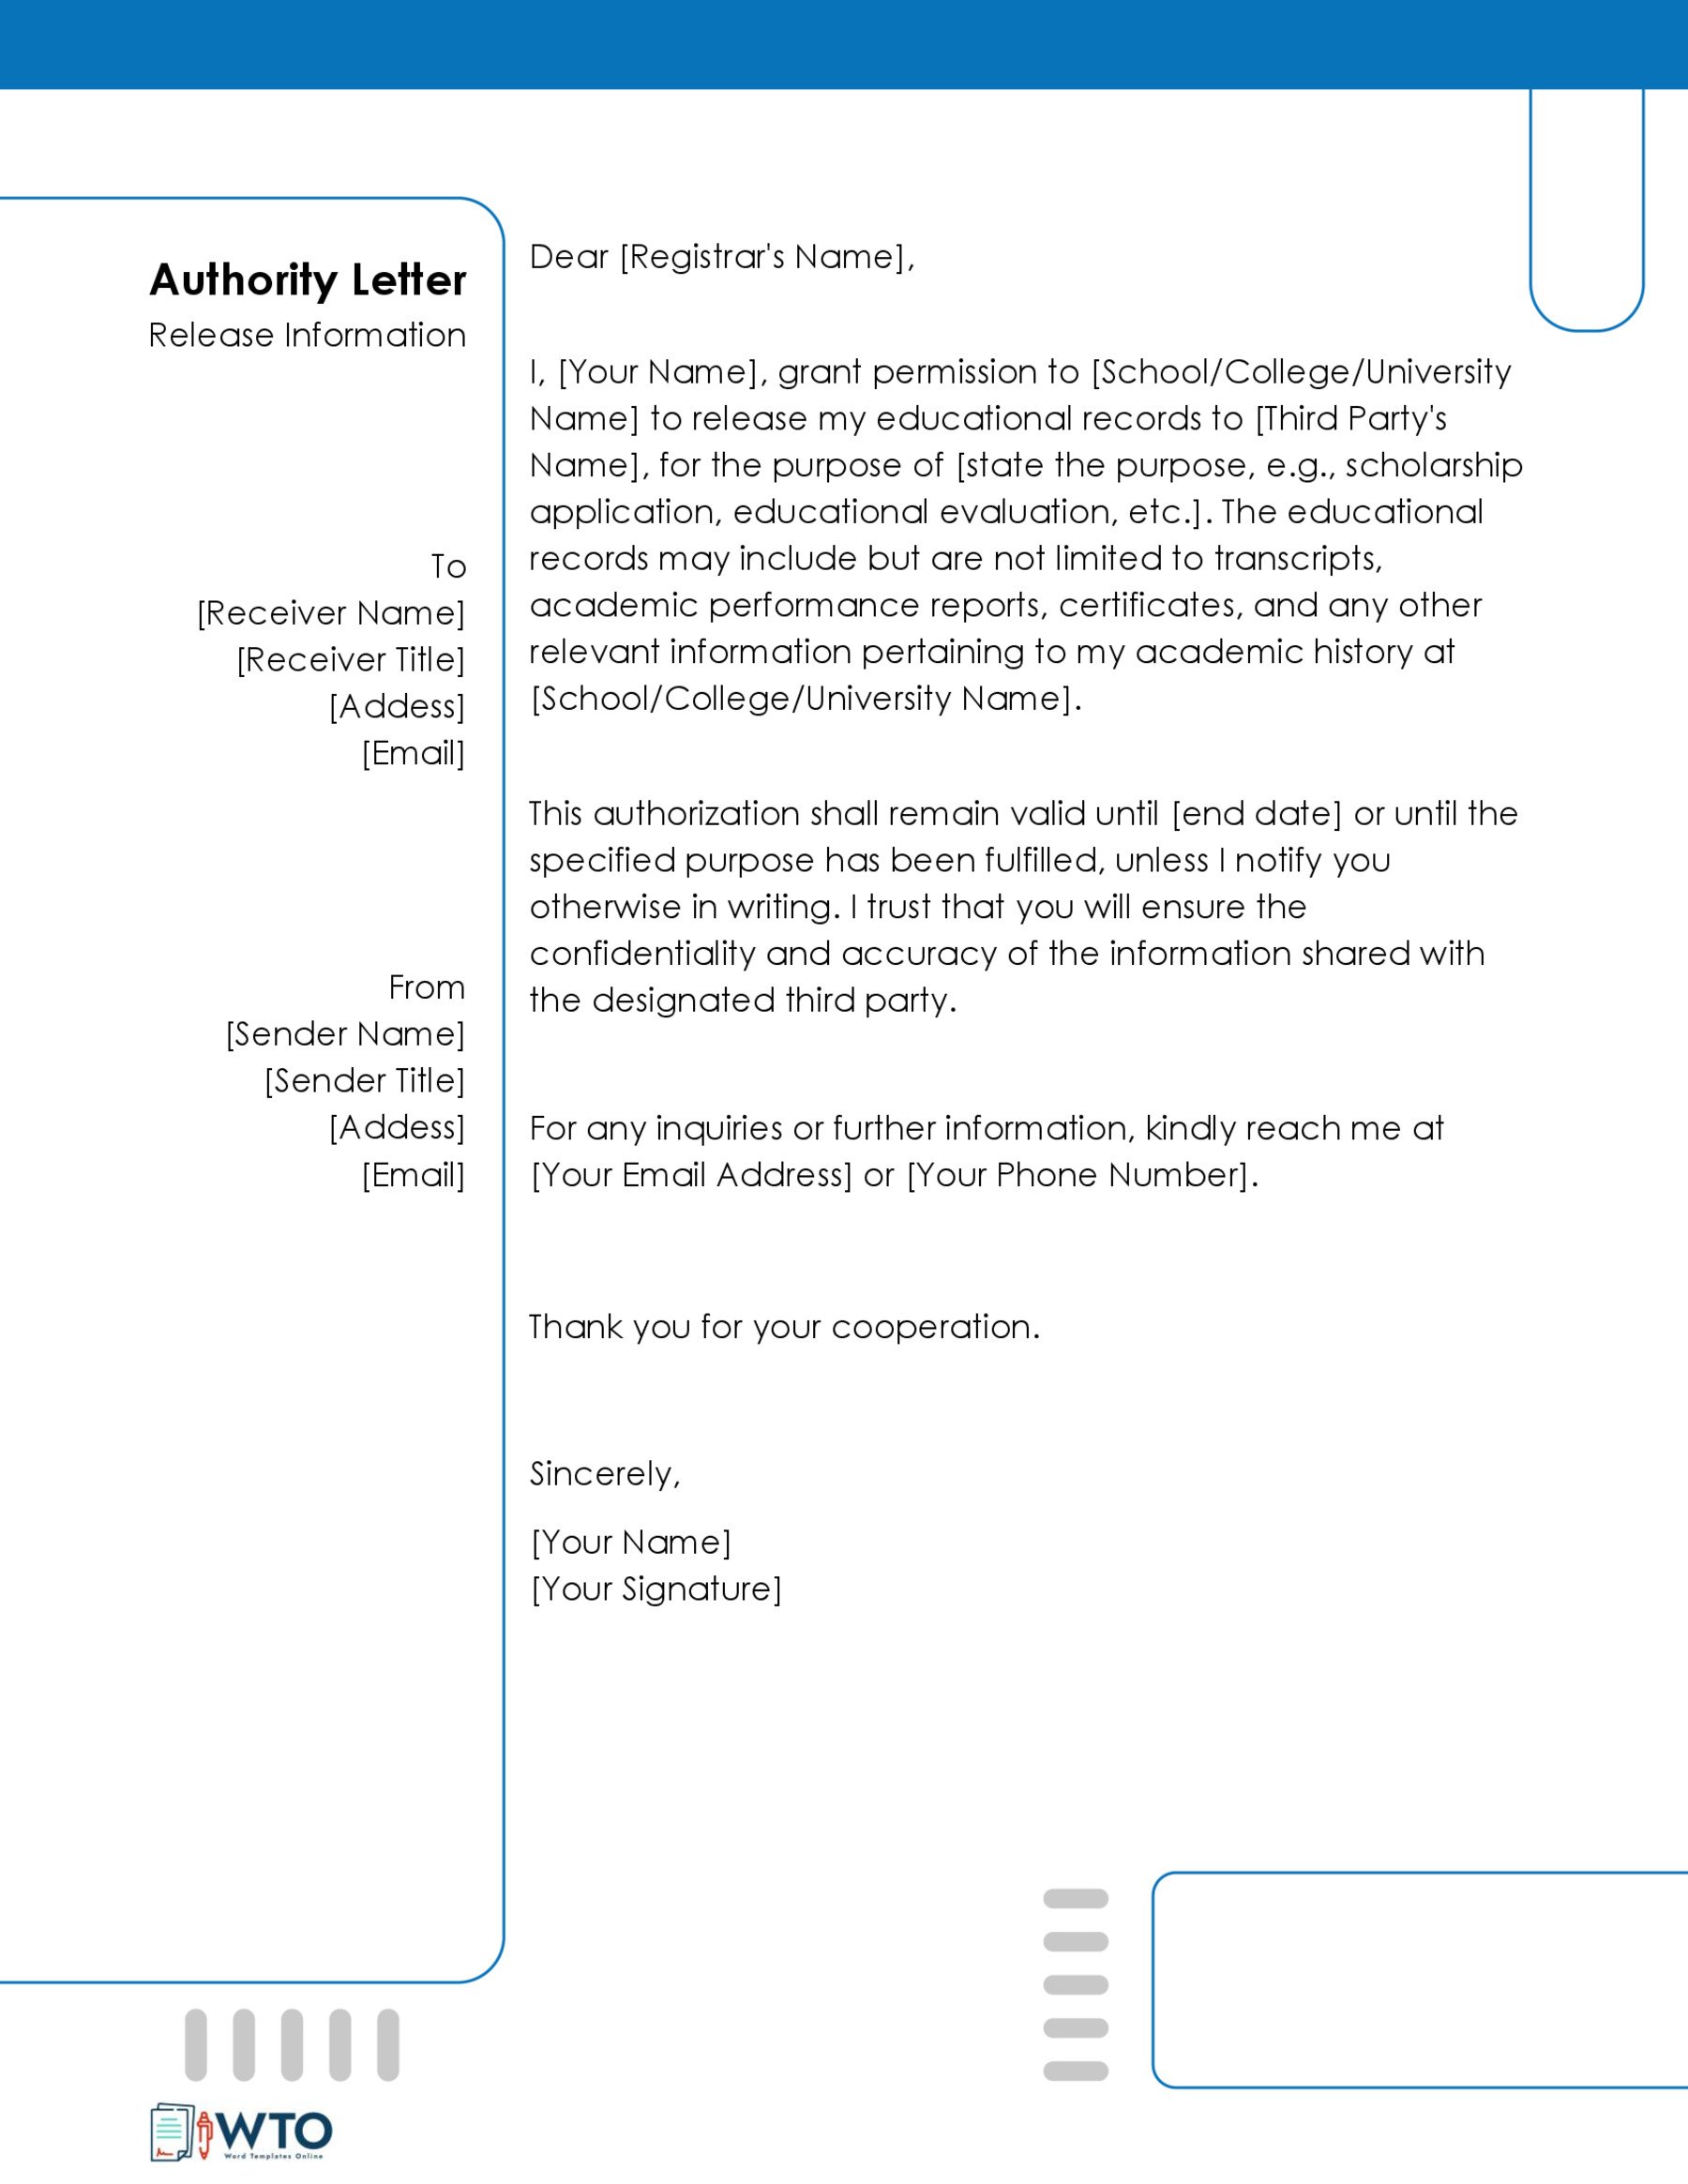 Authorization Letter to Release Information Template-Free Downloadable